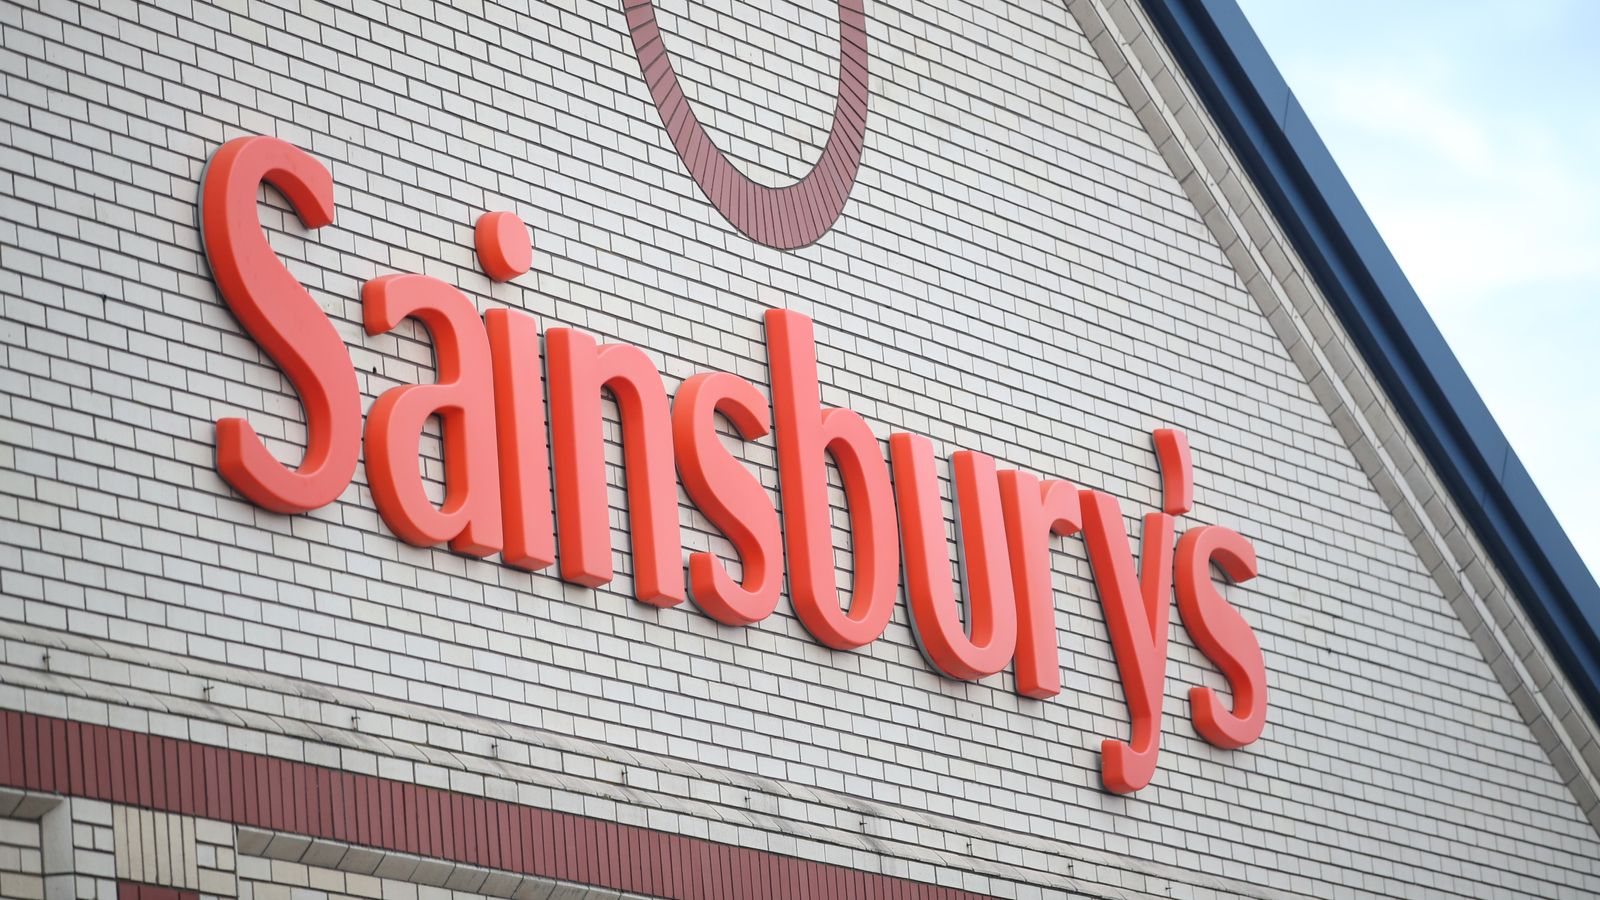 Sainsbury’s to cut 1,500 jobs in cost-cutting plan